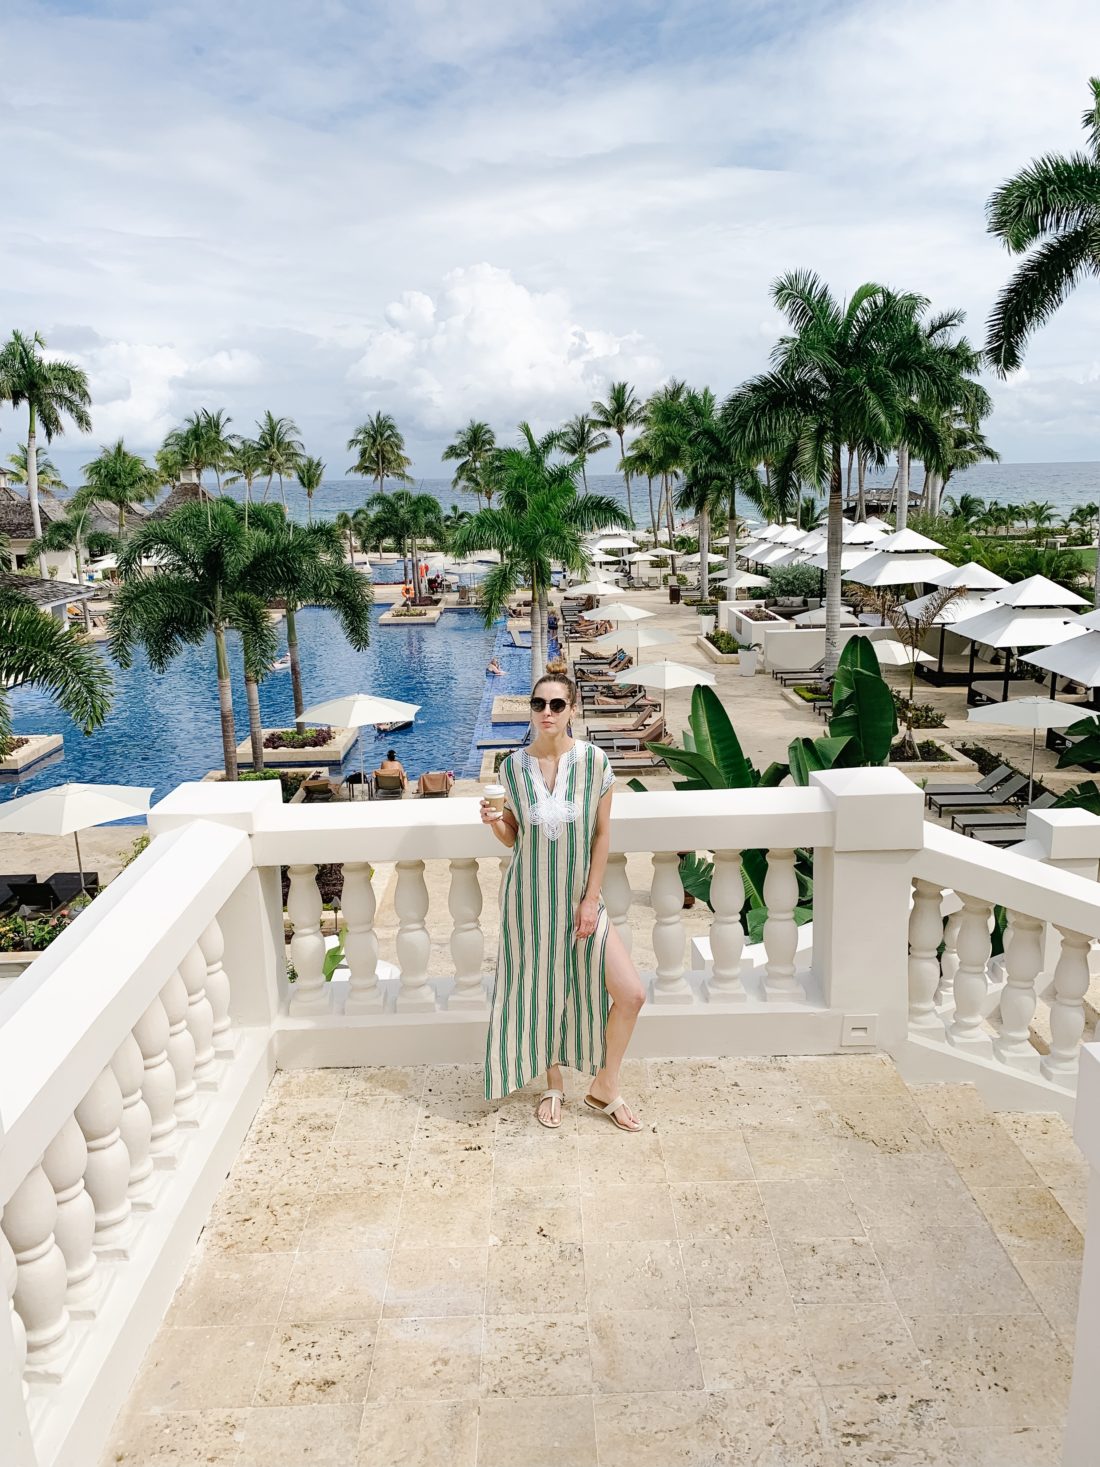 Eva Amurri Martino of Happily Eva After poses in a Tory Burch cover up on her family trip to Jamaica